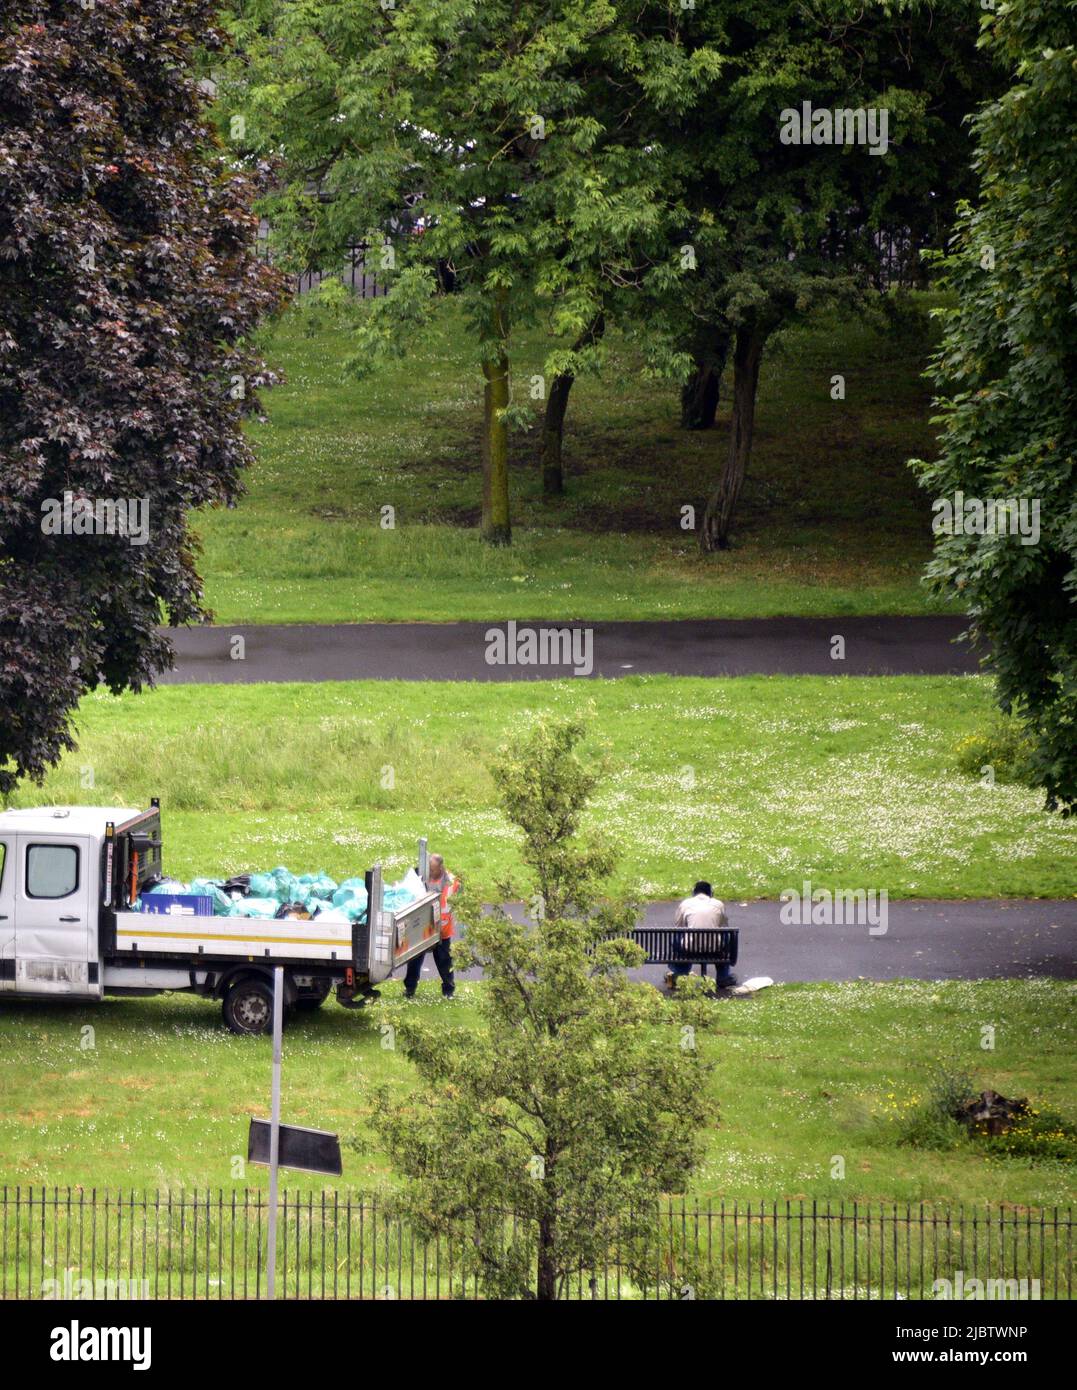 Manchester, UK, 8th June, 2022. Overhead view. A refuse collection worker collects rubbish in Ardwick Green Park, owned by Manchester City Council, England, United Kingdom, British Isles. Delivery of services by local government. The three local government unions, Unite, UNISON, and GMB, have submitted a pay claim for staff in England, Wales and Northern Ireland to receive a pay  increase of £2,000 each or the current rate of RPI (presently 11.1%), whichever is higher for each individual. Credit: Terry Waller/Alamy Live News Stock Photo